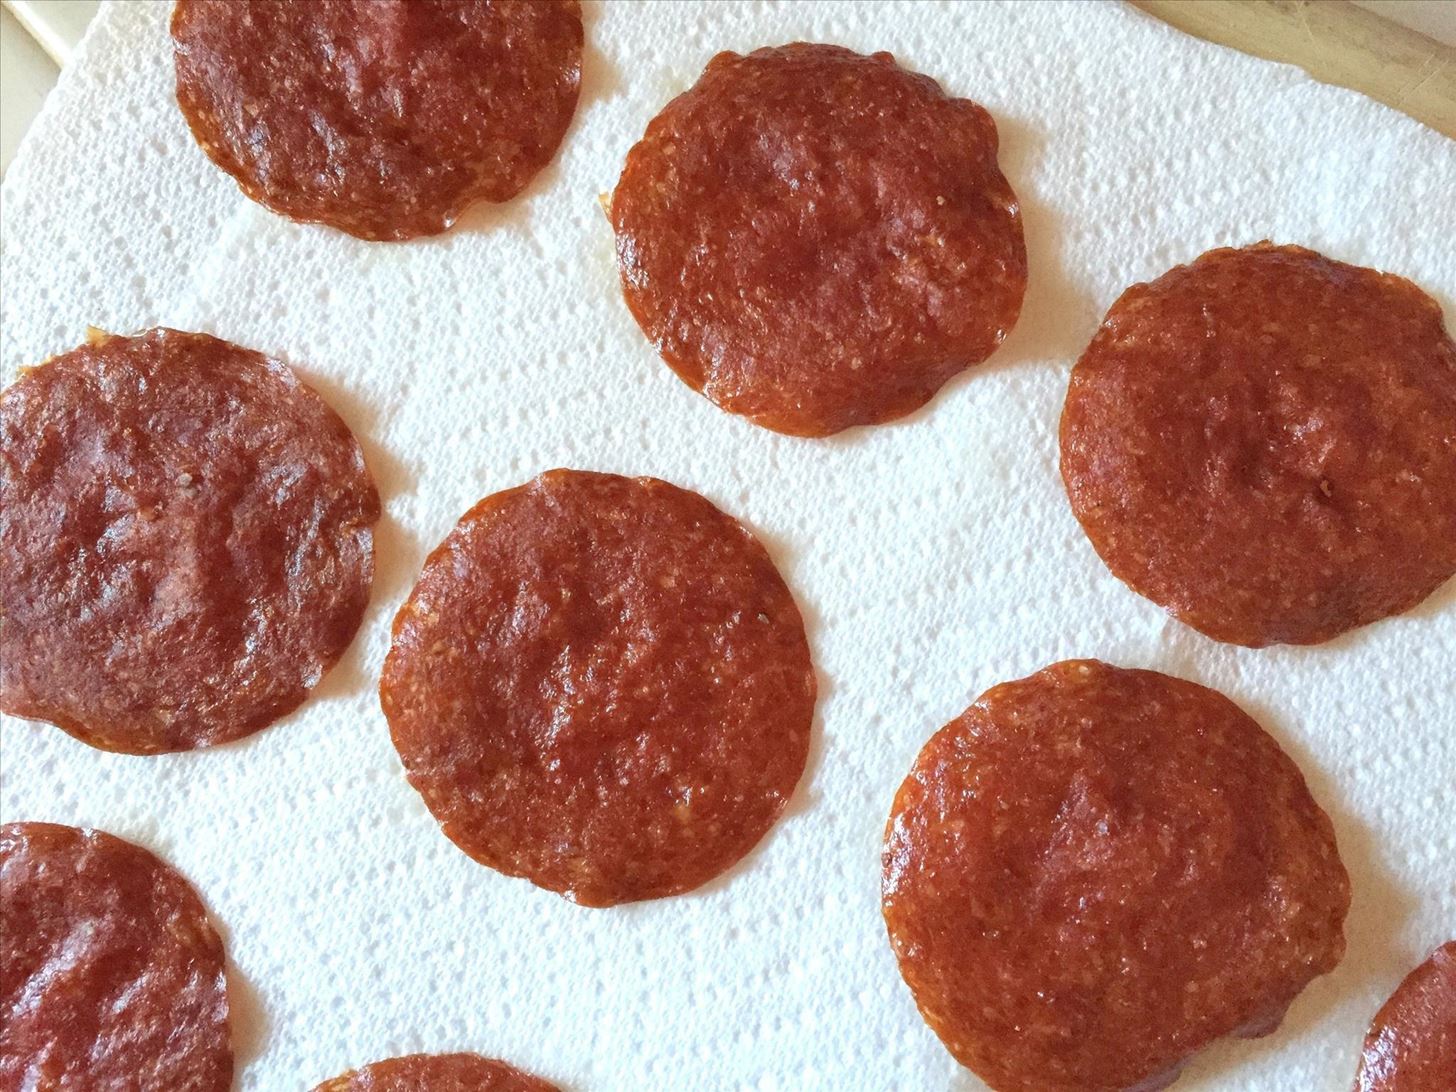 Turn Salami Slices into Crispy, Savory Snack Chips You Can Dip